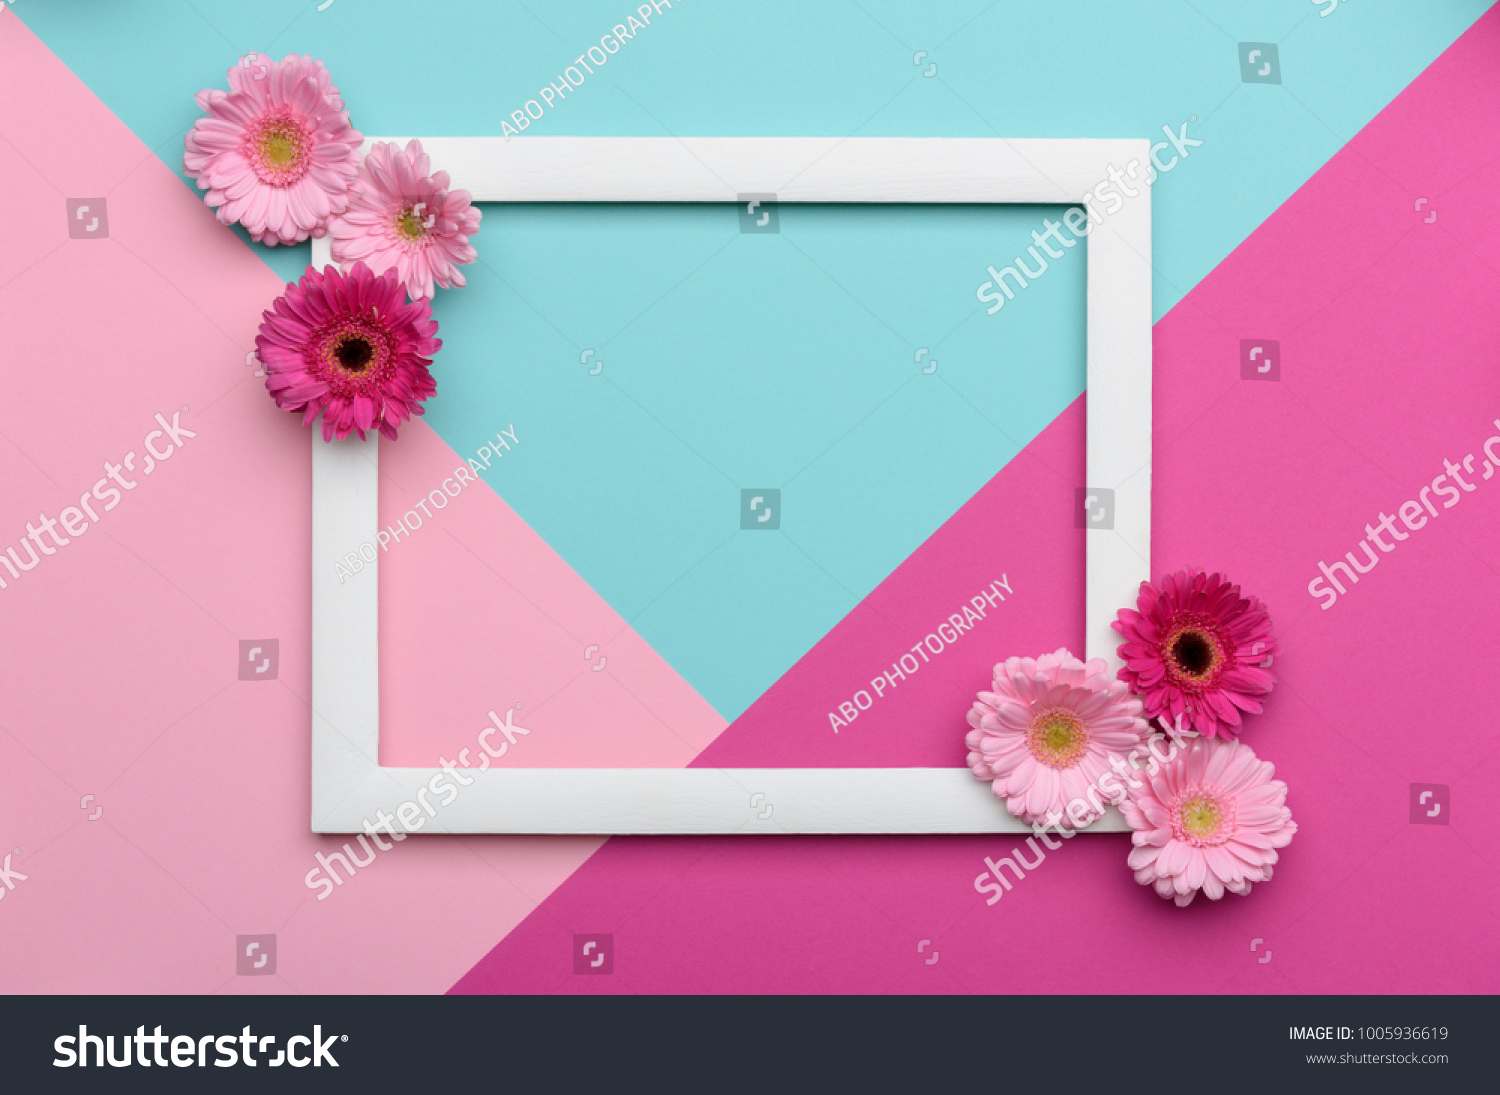 Happy Mother's Day, Women's Day, Valentine's Day or Birthday Pastel Candy Colours Background. Floral flat lay minimalism geometric patterns greeting card. #1005936619